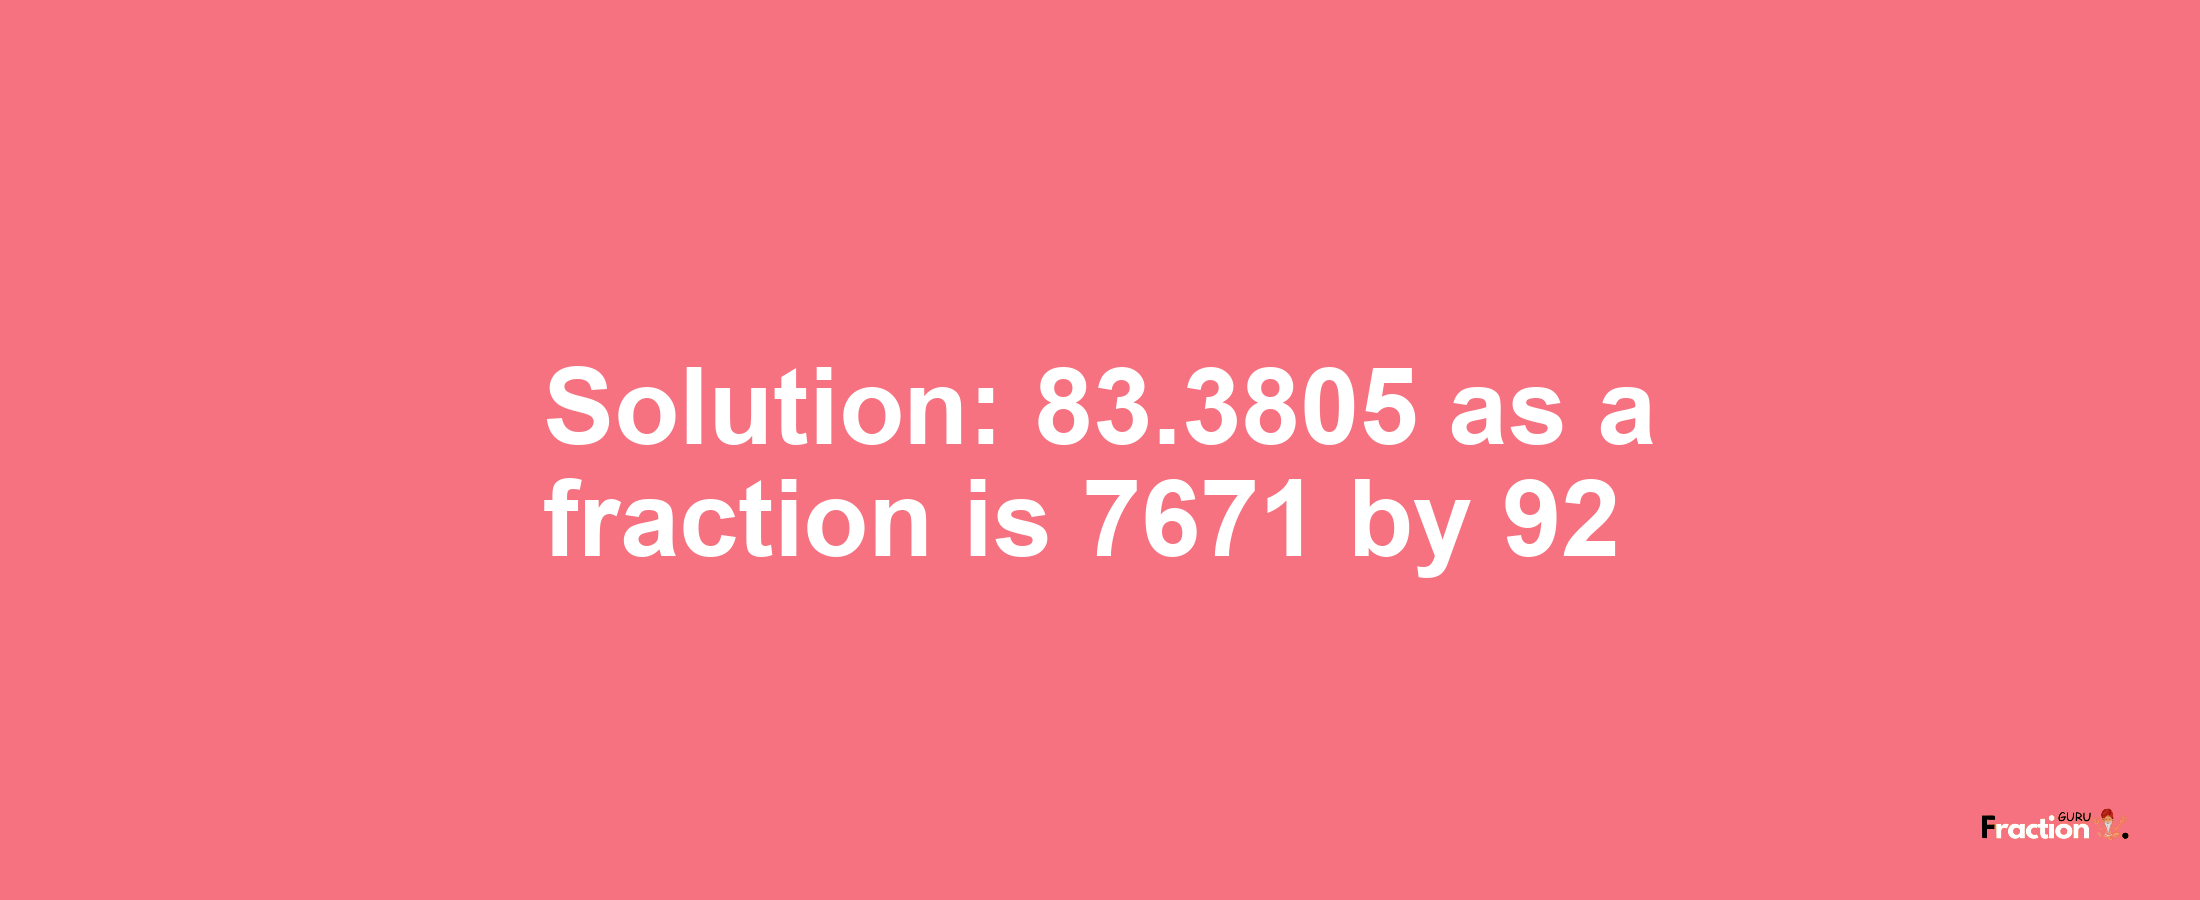 Solution:83.3805 as a fraction is 7671/92